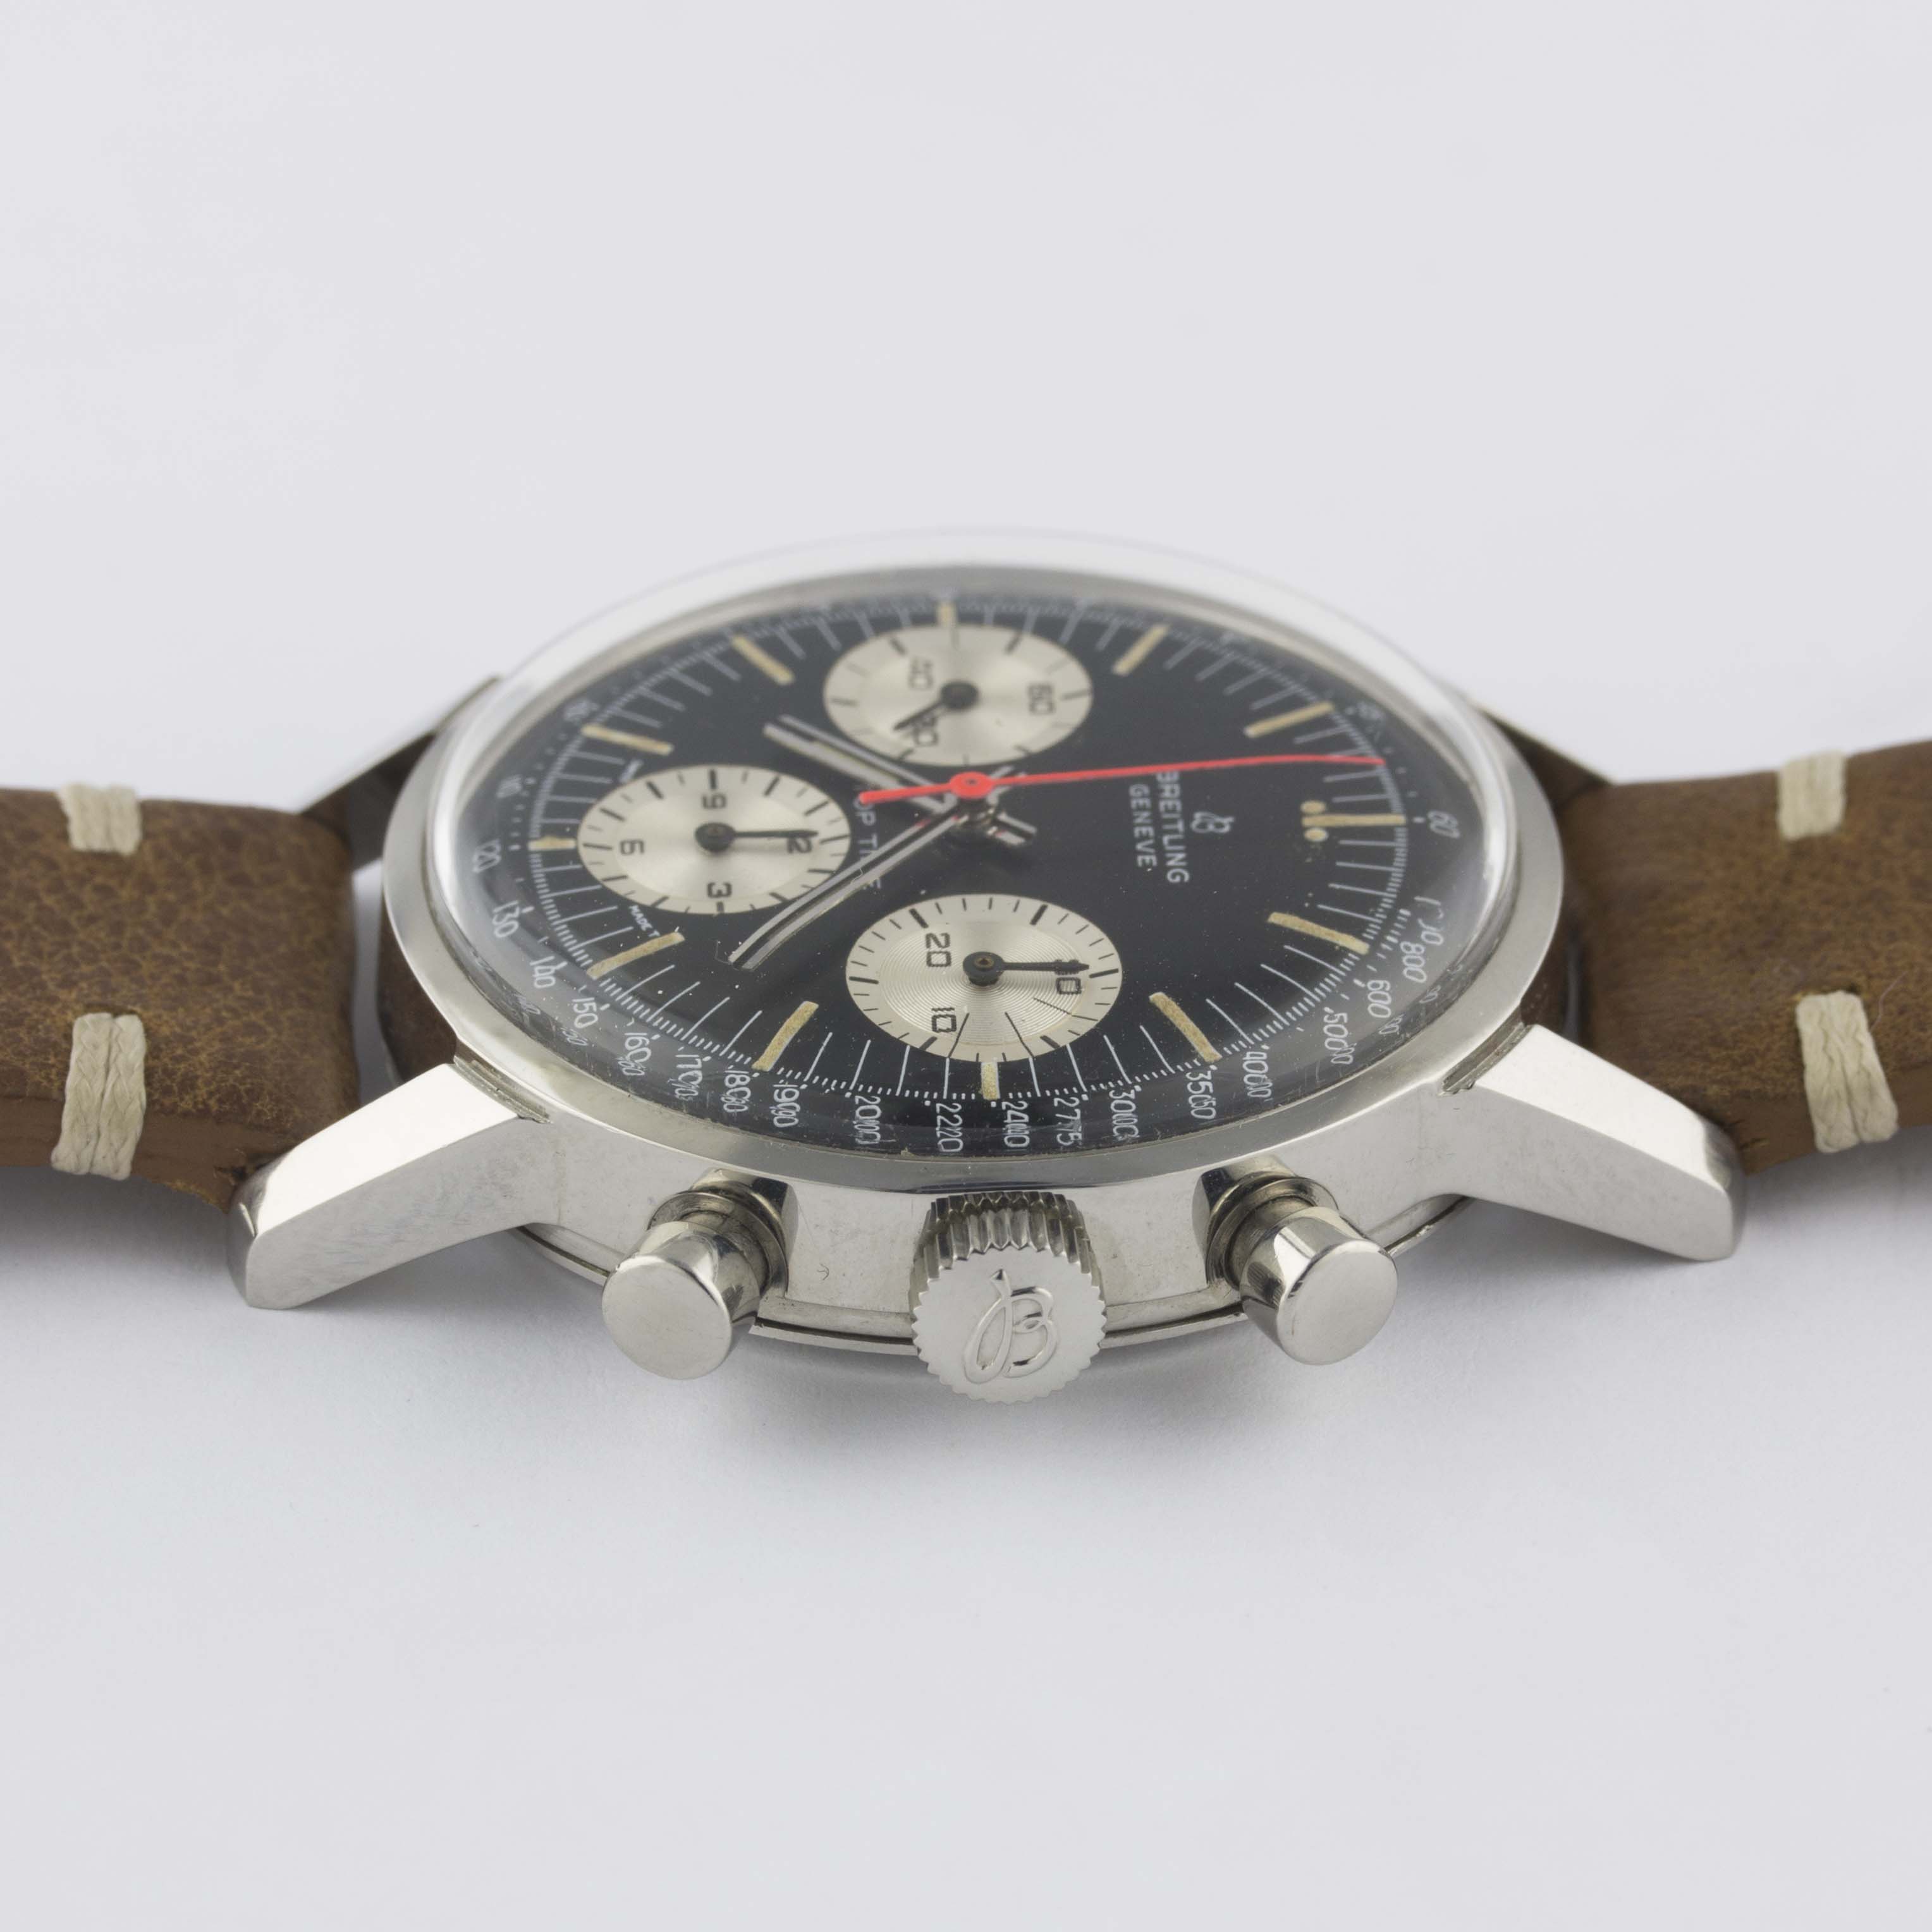 A RARE GENTLEMAN'S STAINLESS STEEL BREITLING TOP TIME CHRONOGRAPH WRIST WATCH CIRCA 1969, REF. 810 - Image 10 of 11